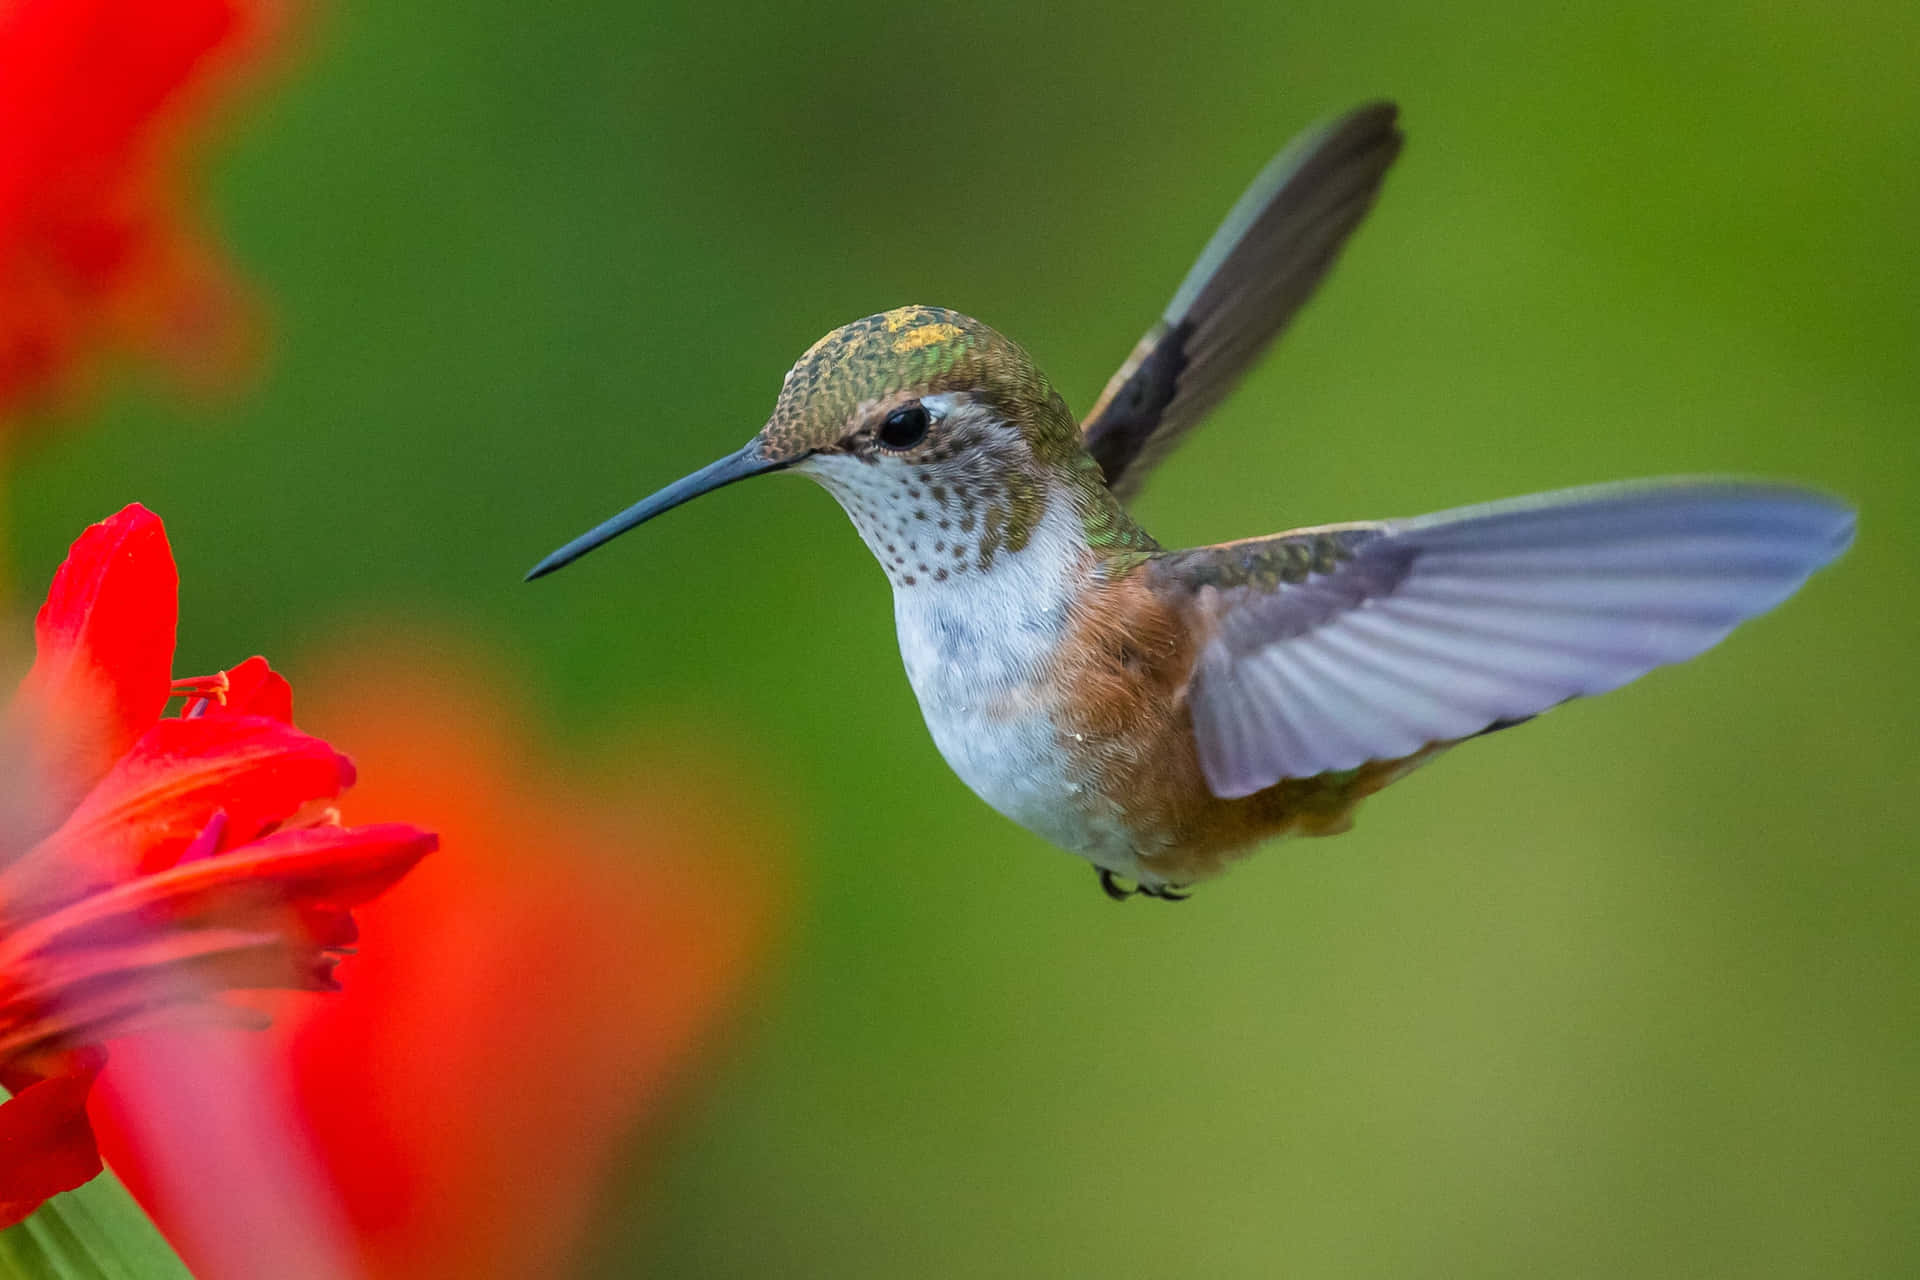 A close-up of a Female Hummingbird in all Its Beauty